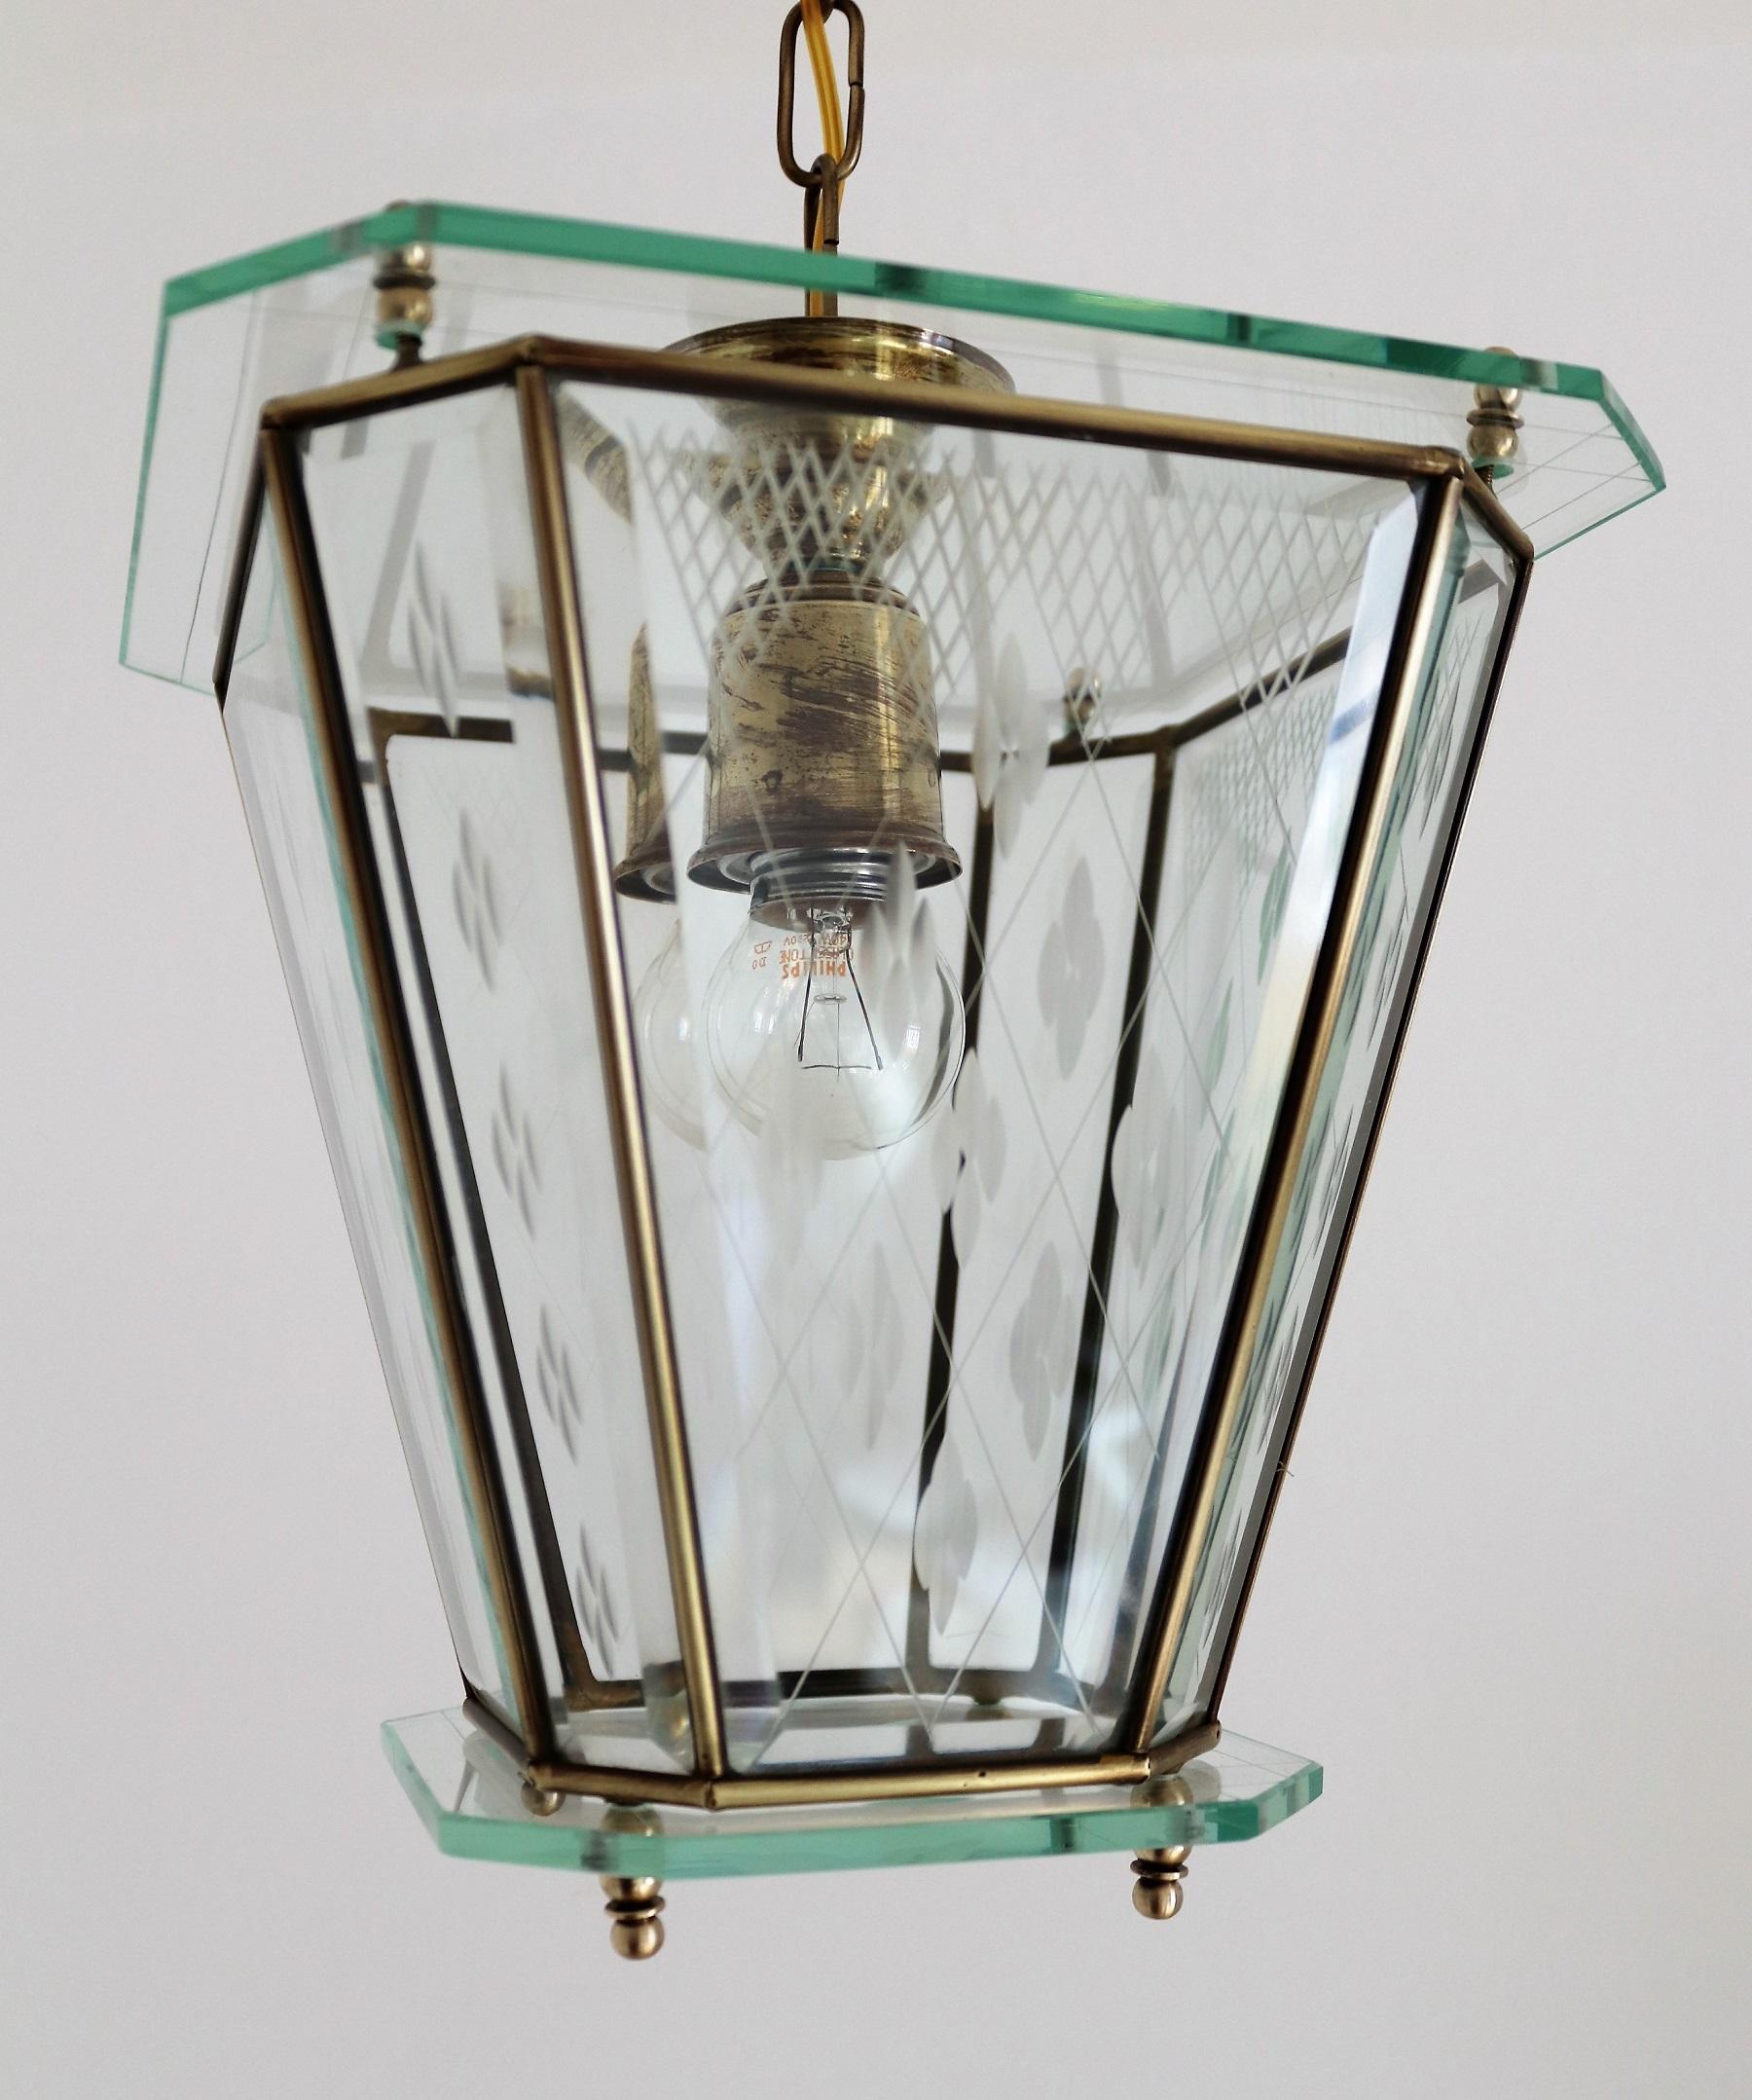 Italian Vintage Lantern in Crystal Cut Glass and Brass, 1950s For Sale 7